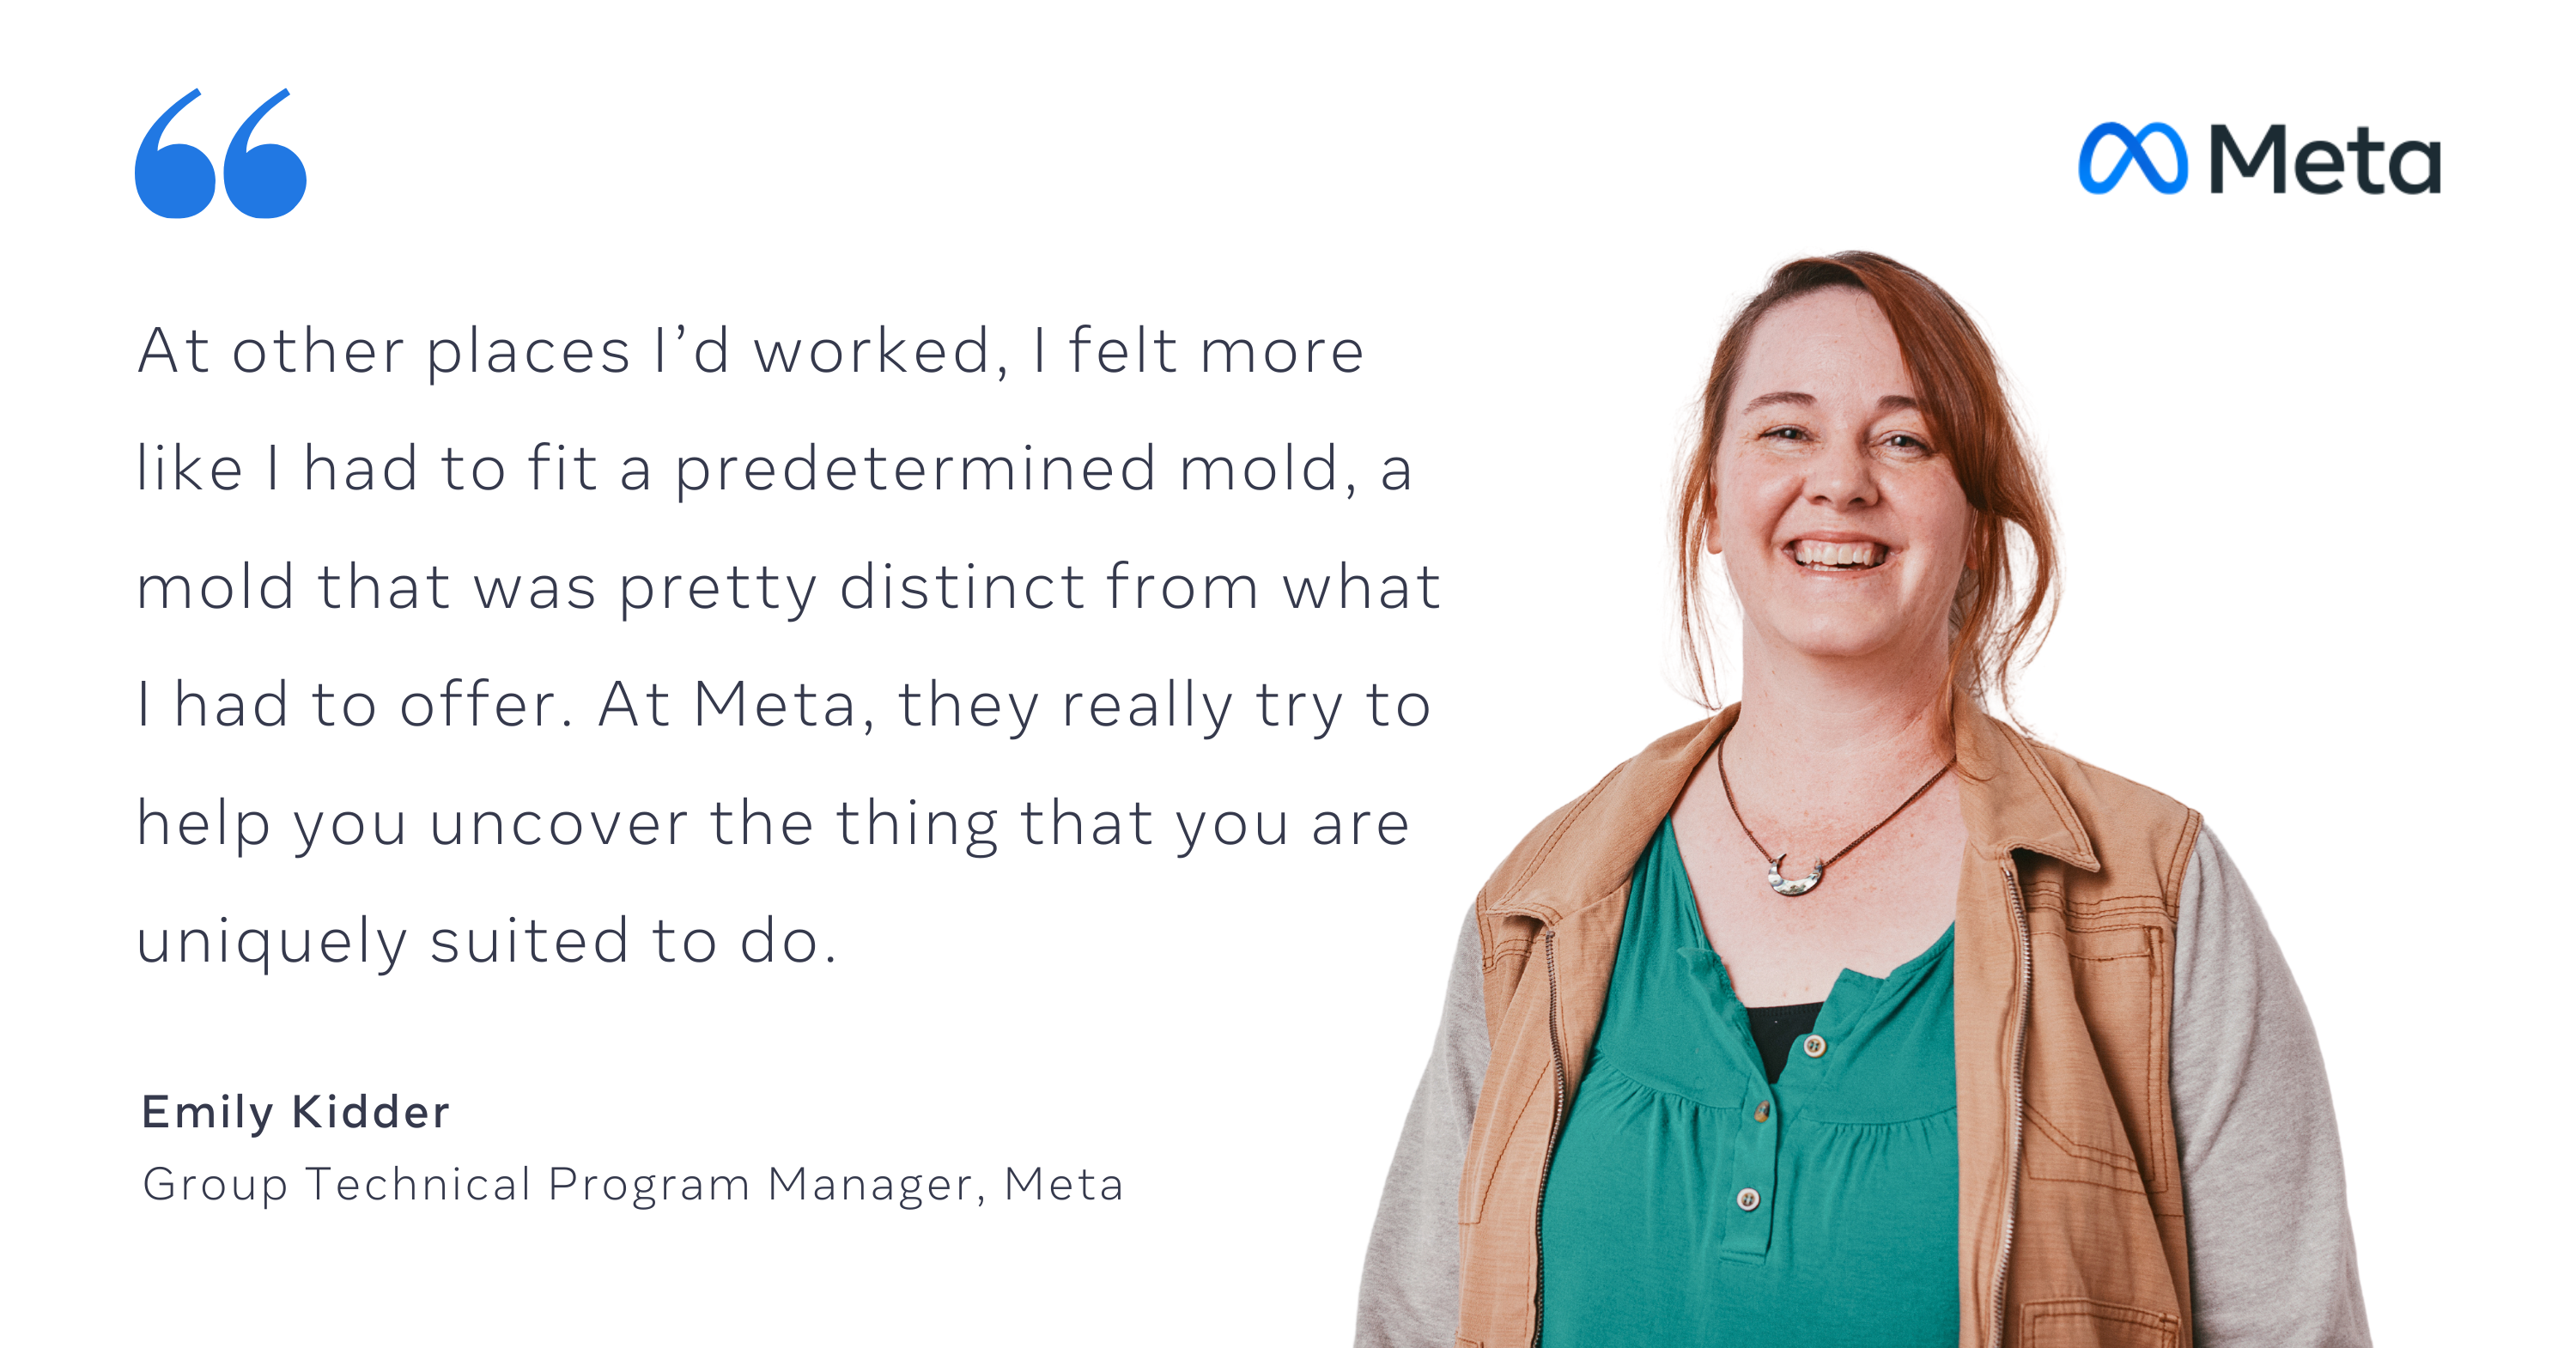 From Academia to Tech: How Emily Kidder Found Her Home as a TPM at Meta